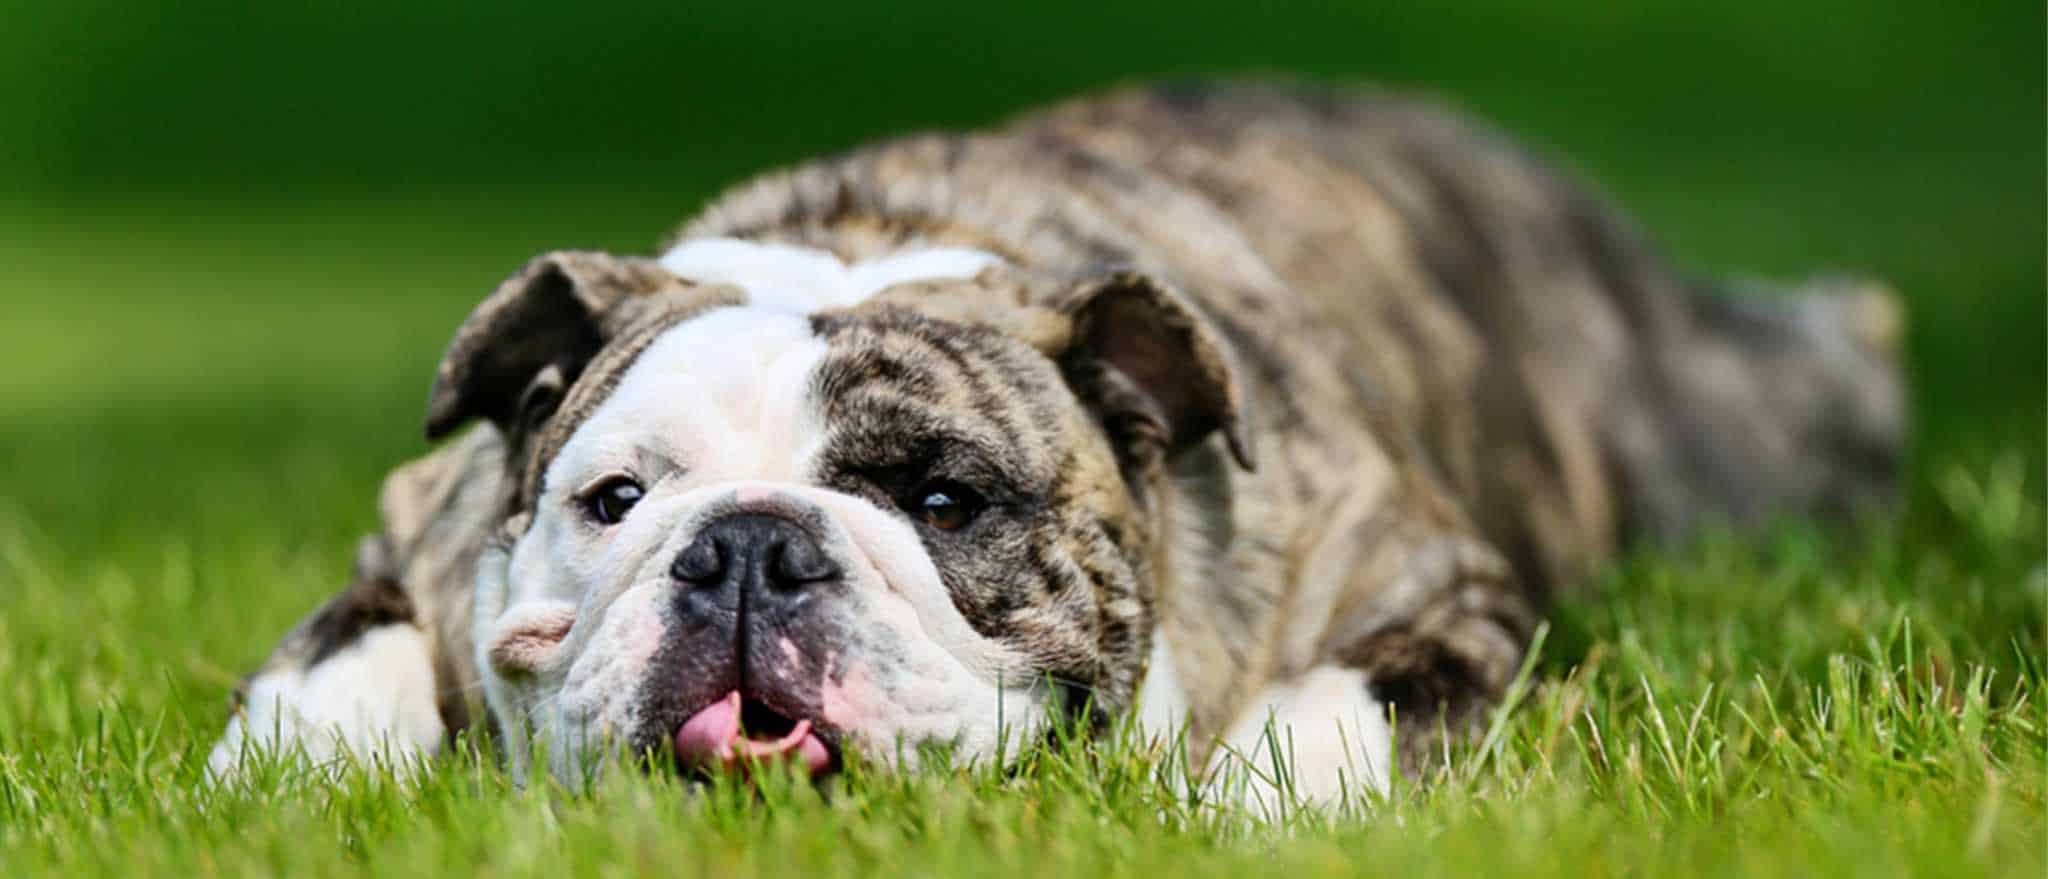 Dog lying on the grass